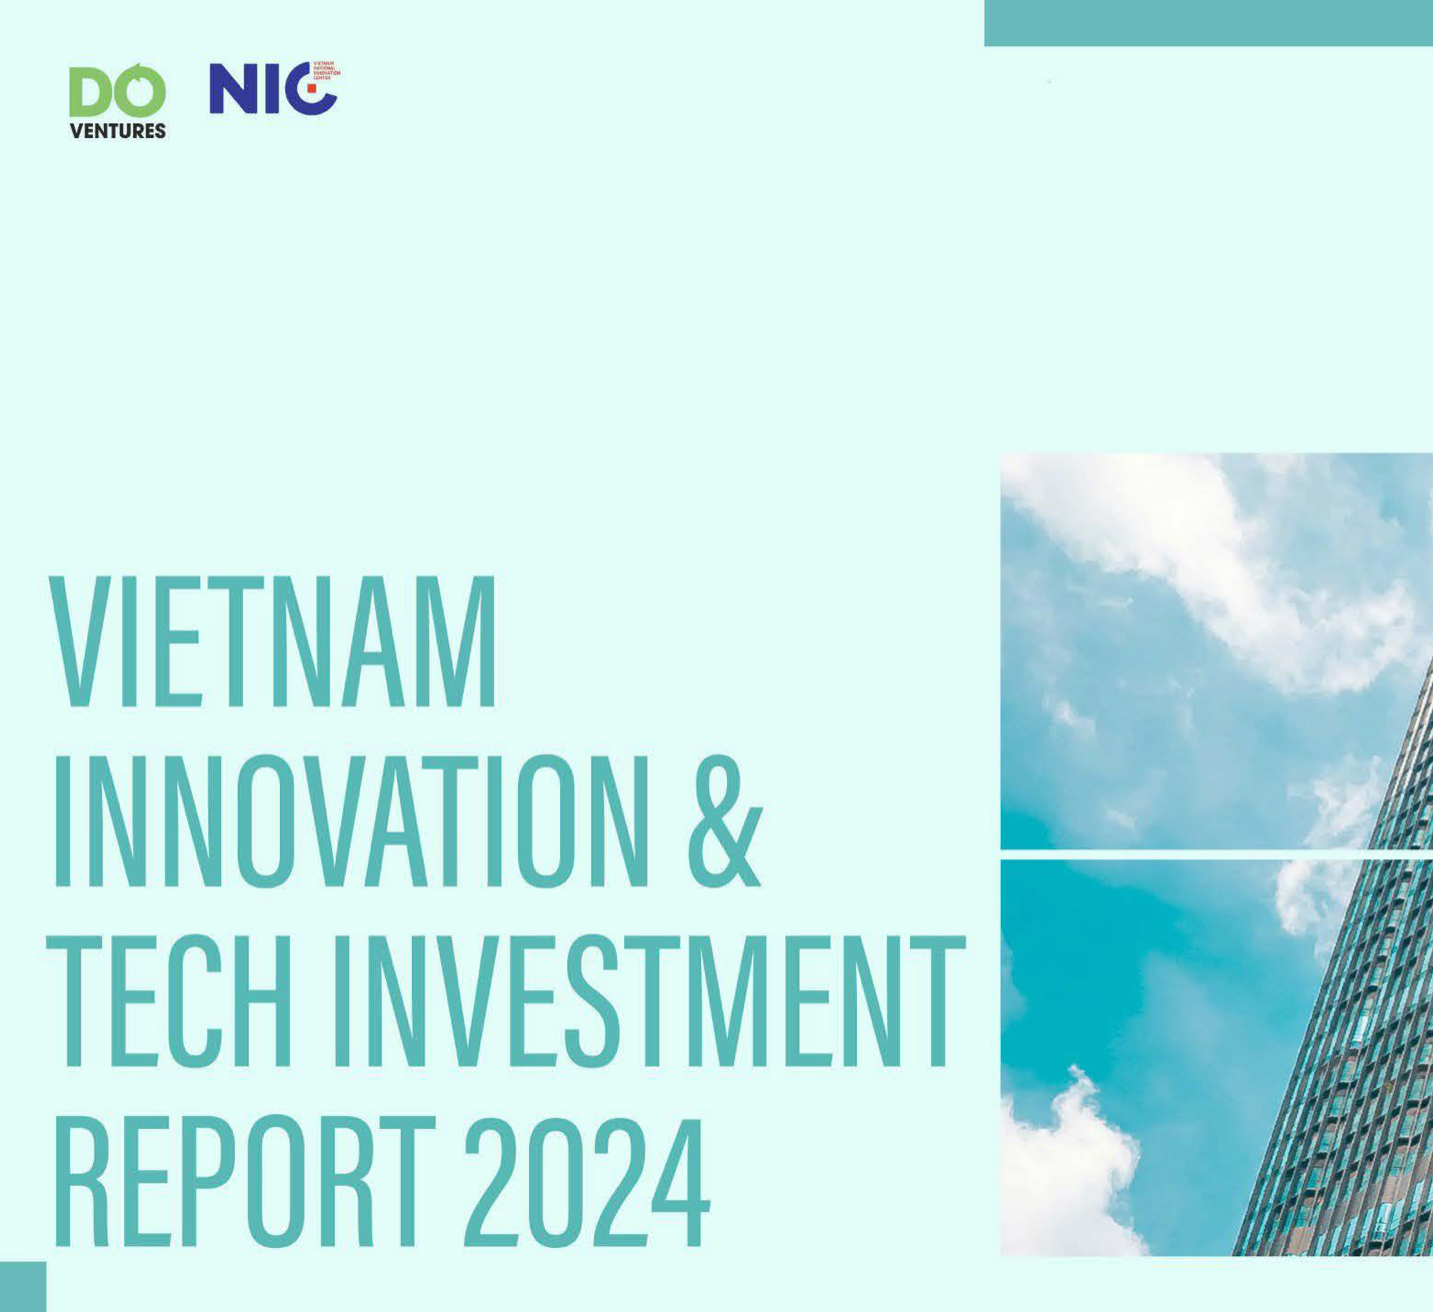 VIETNAM INNOVATION FORUM AND THE LAUNCH OF VIETNAM INNOVATION & TECH INVESTMENT REPORT 2024